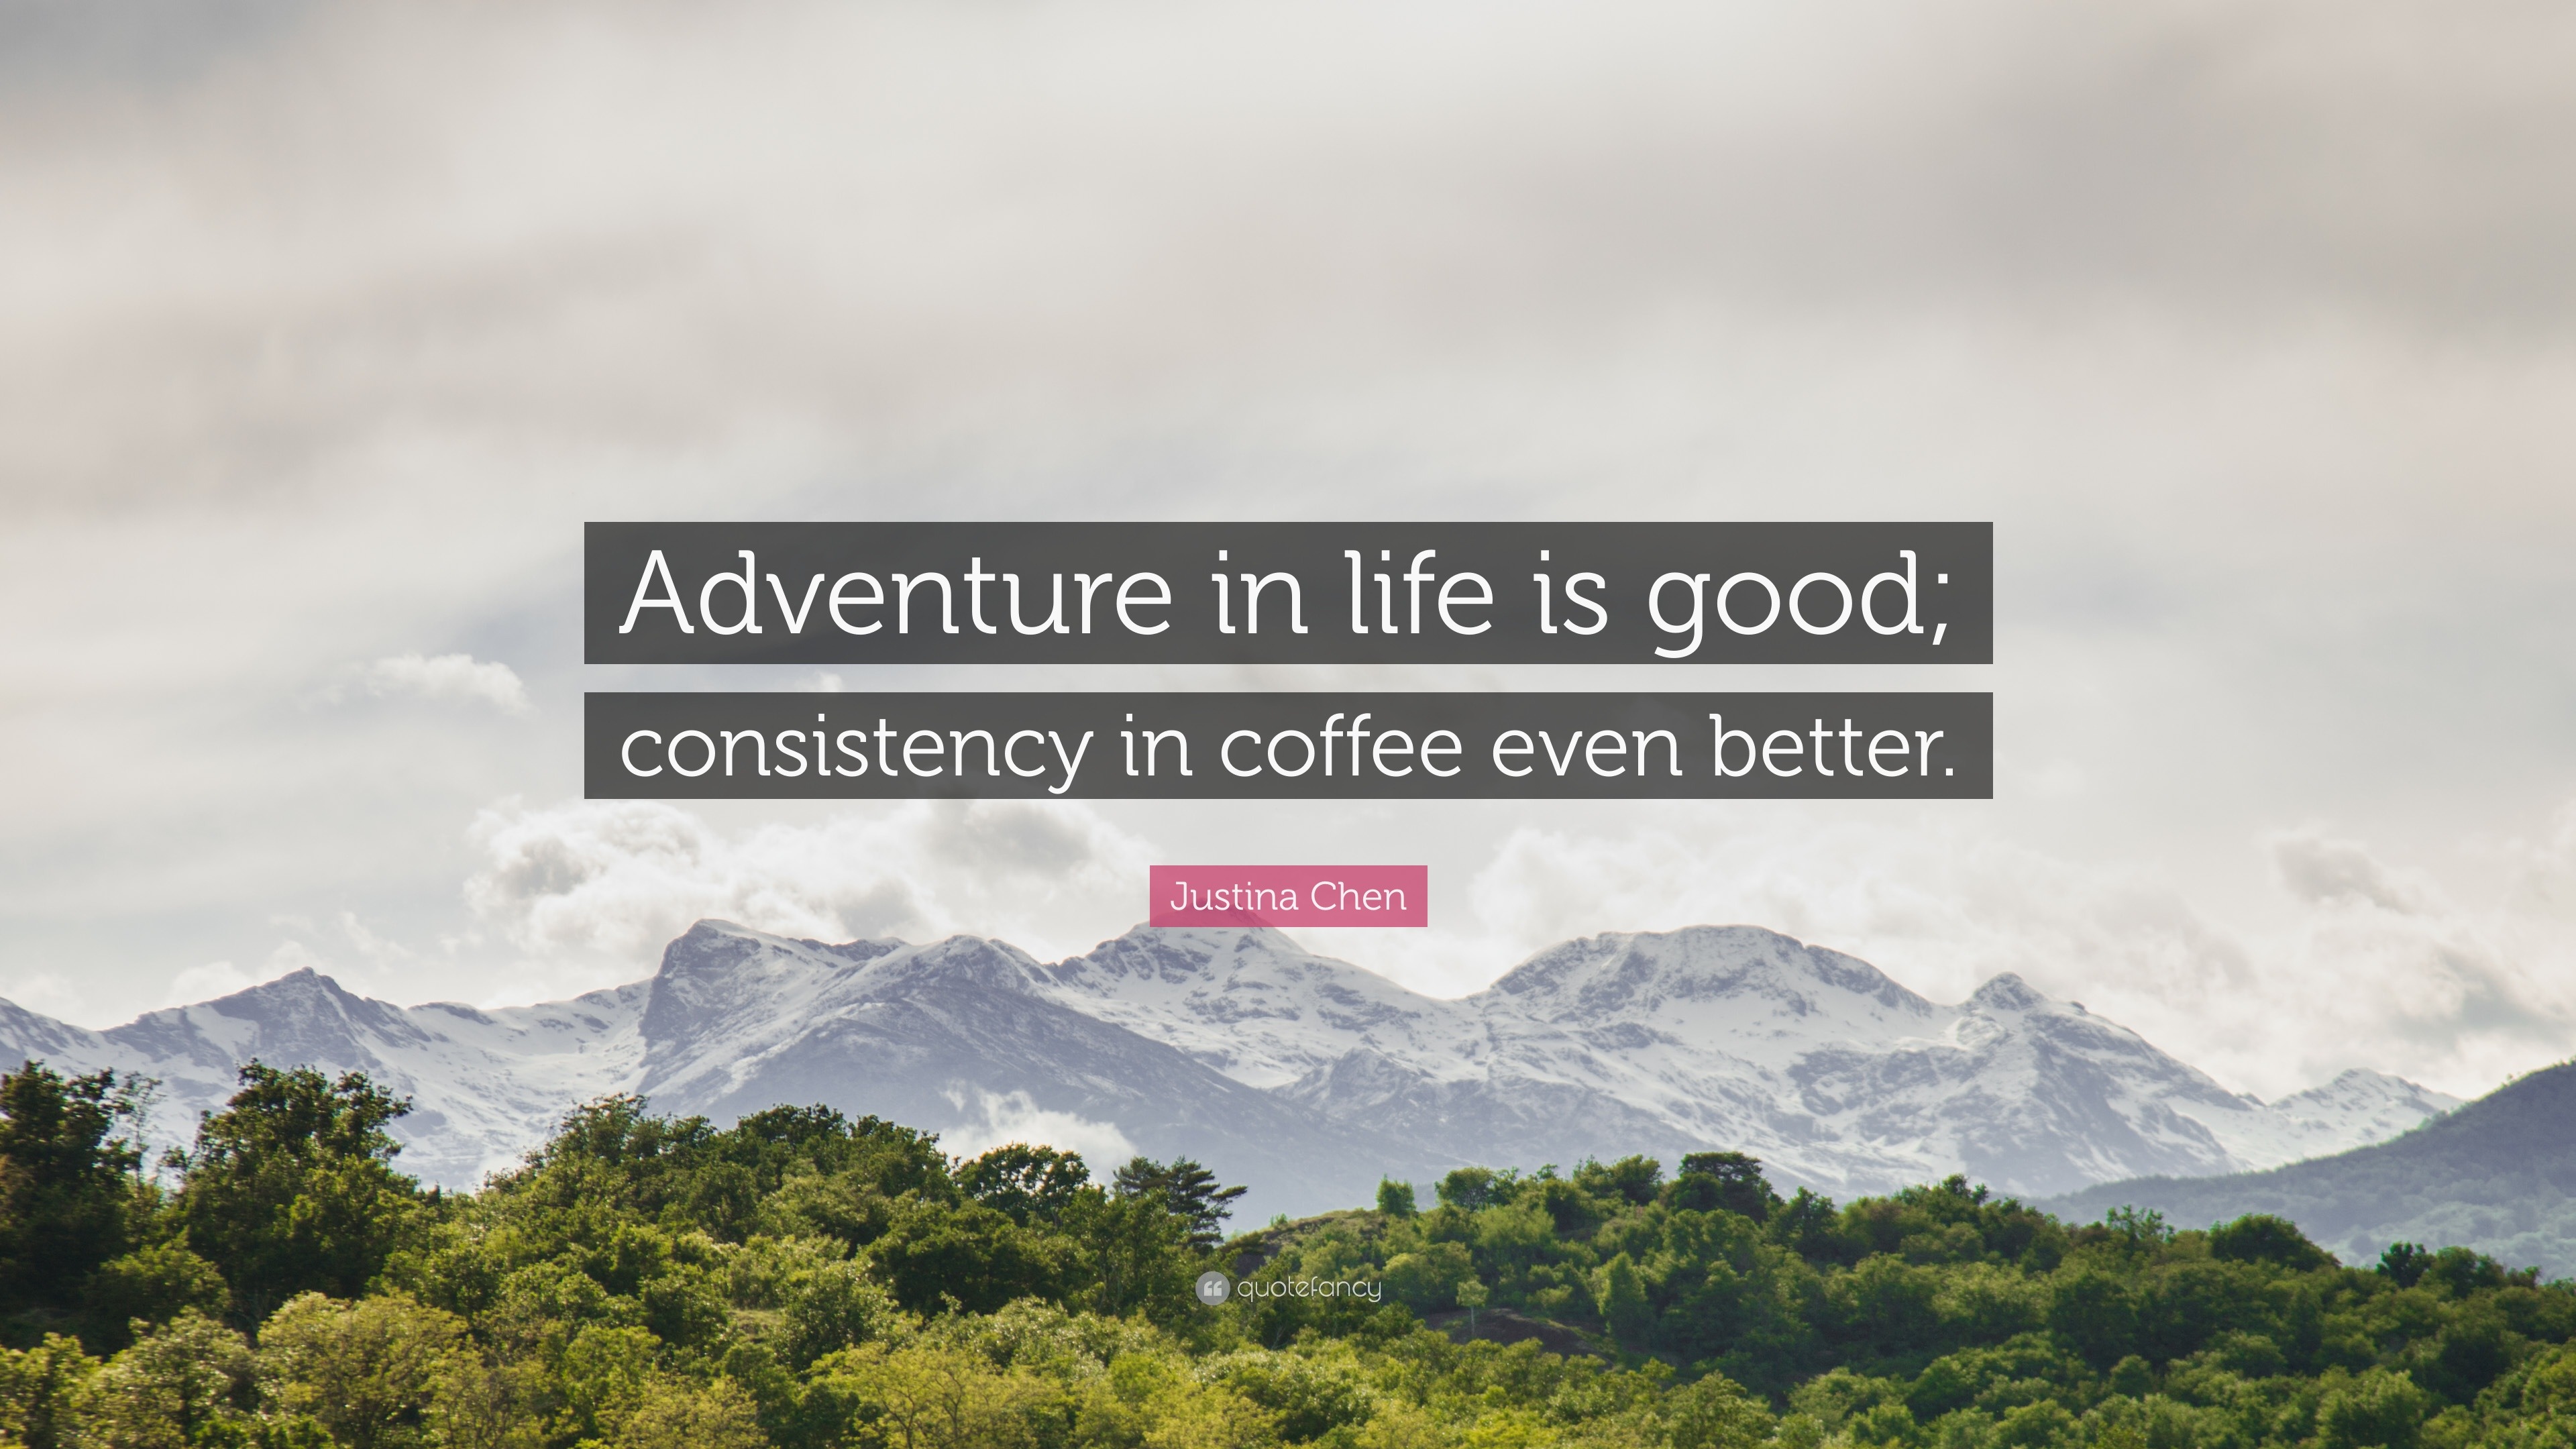 Justina Chen Quote “Adventure in life is good consistency in coffee even better